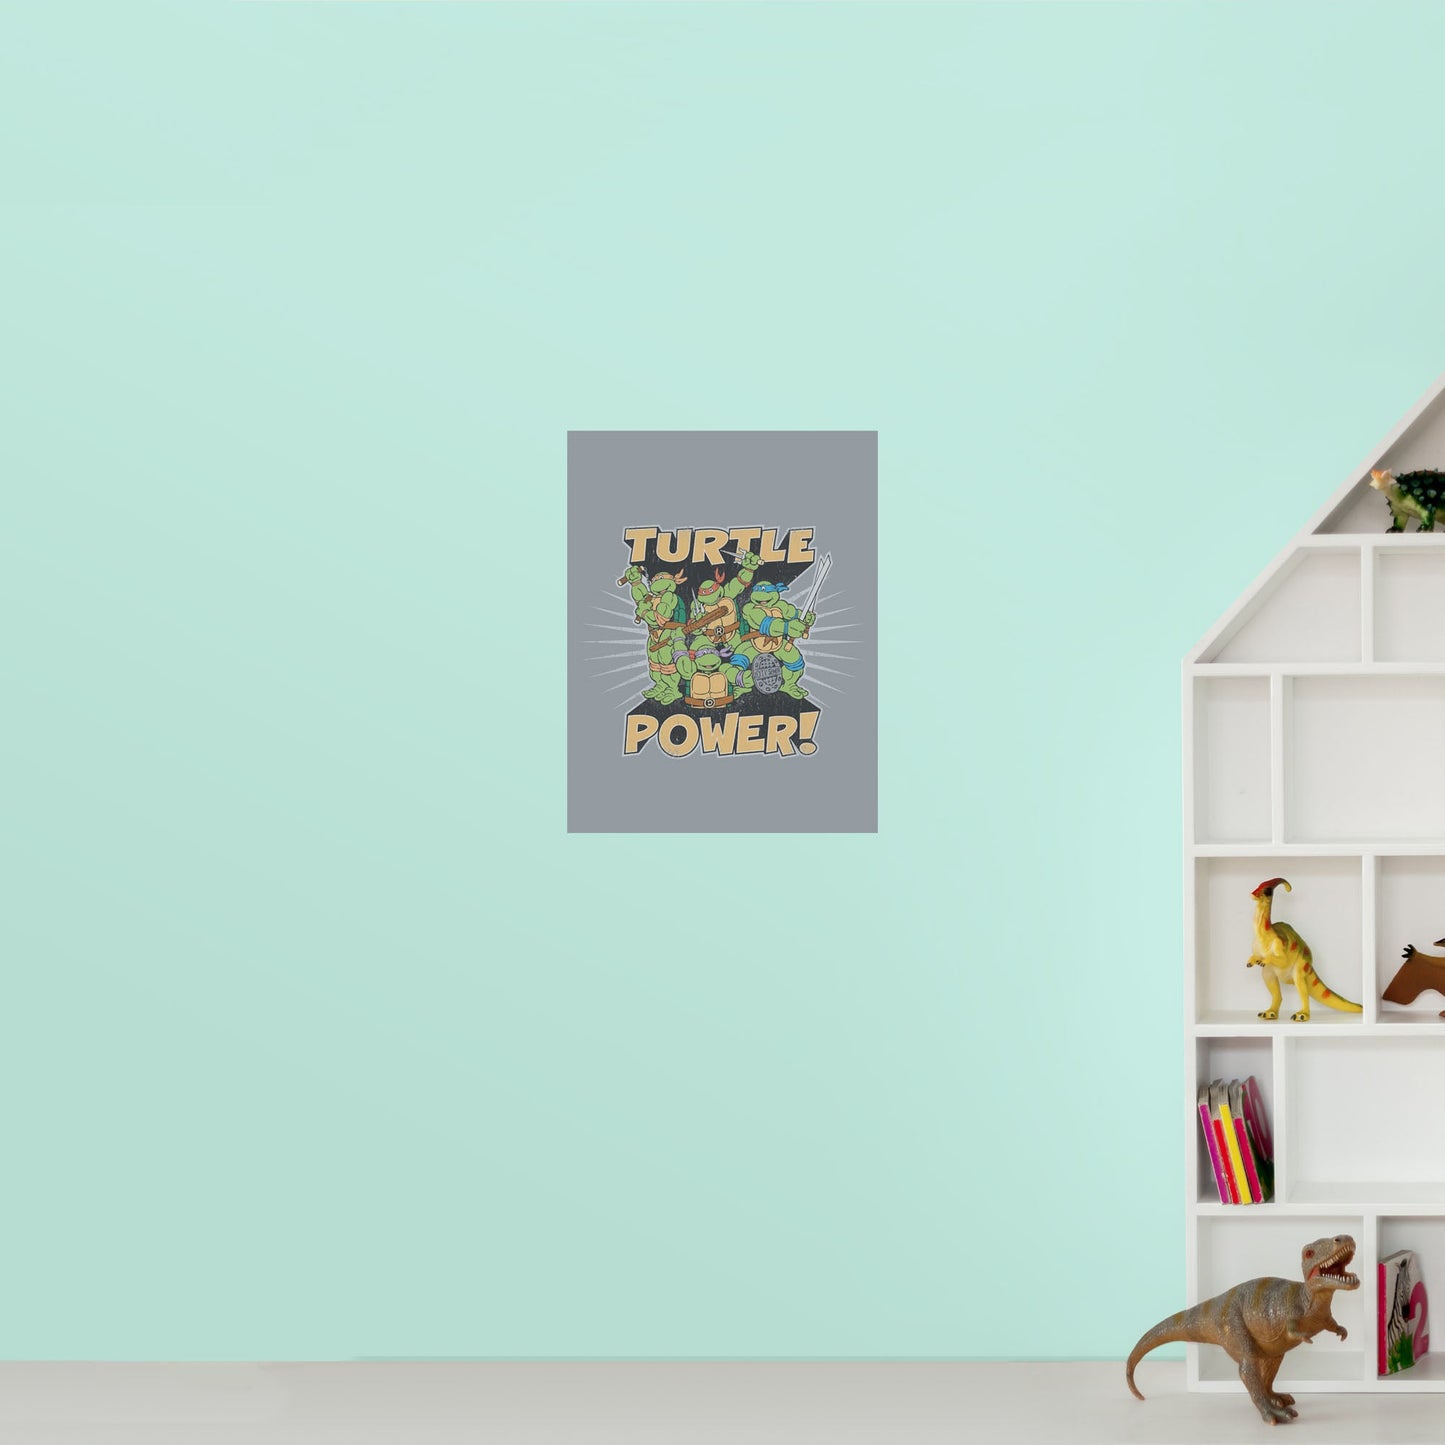 Teenage Mutant Ninja Turtles: Turtle Power Poster - Officially Licensed Nickelodeon Removable Adhesive Decal